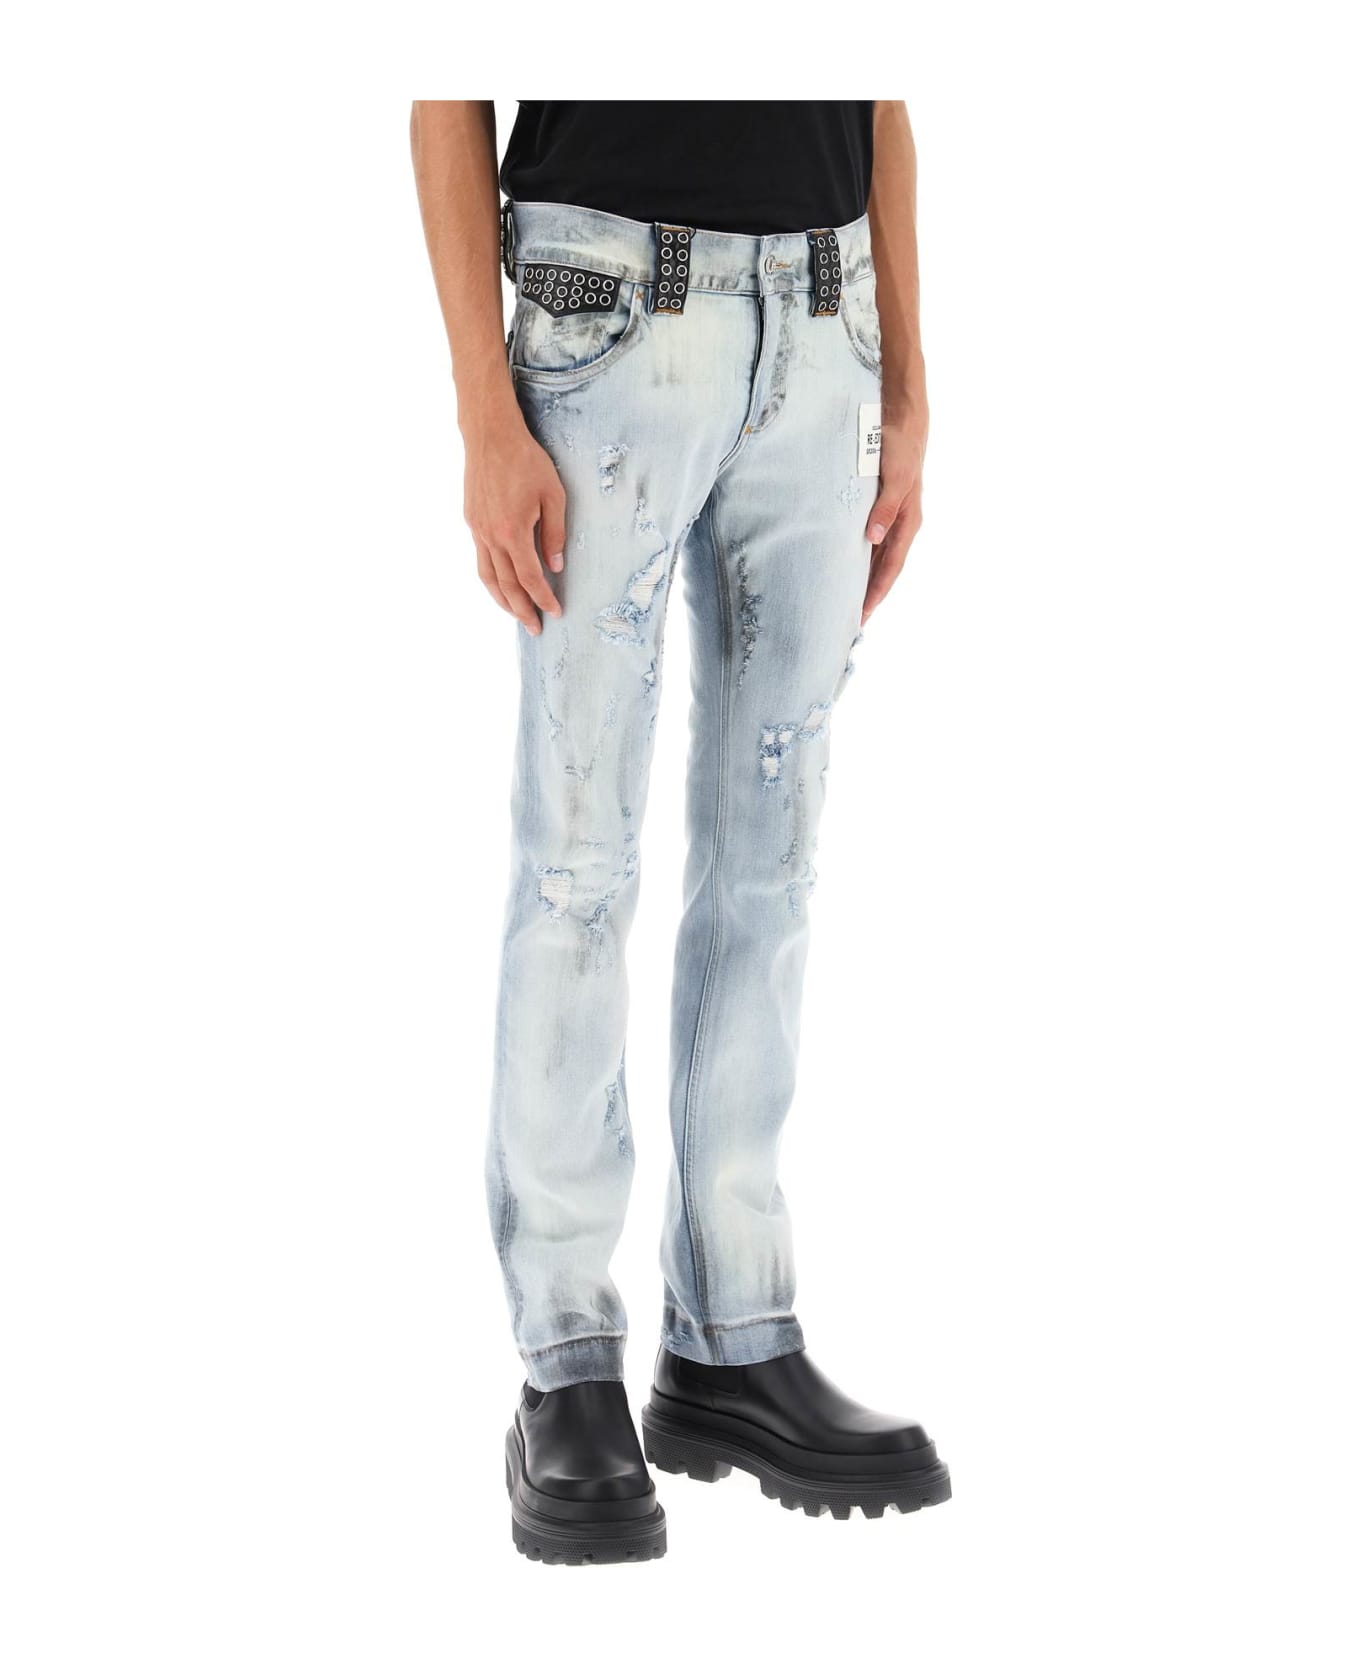 Dolce & Gabbana Re-edition Jeans With Leather Detailing - VARIANTE ABBINATA (Light blue)